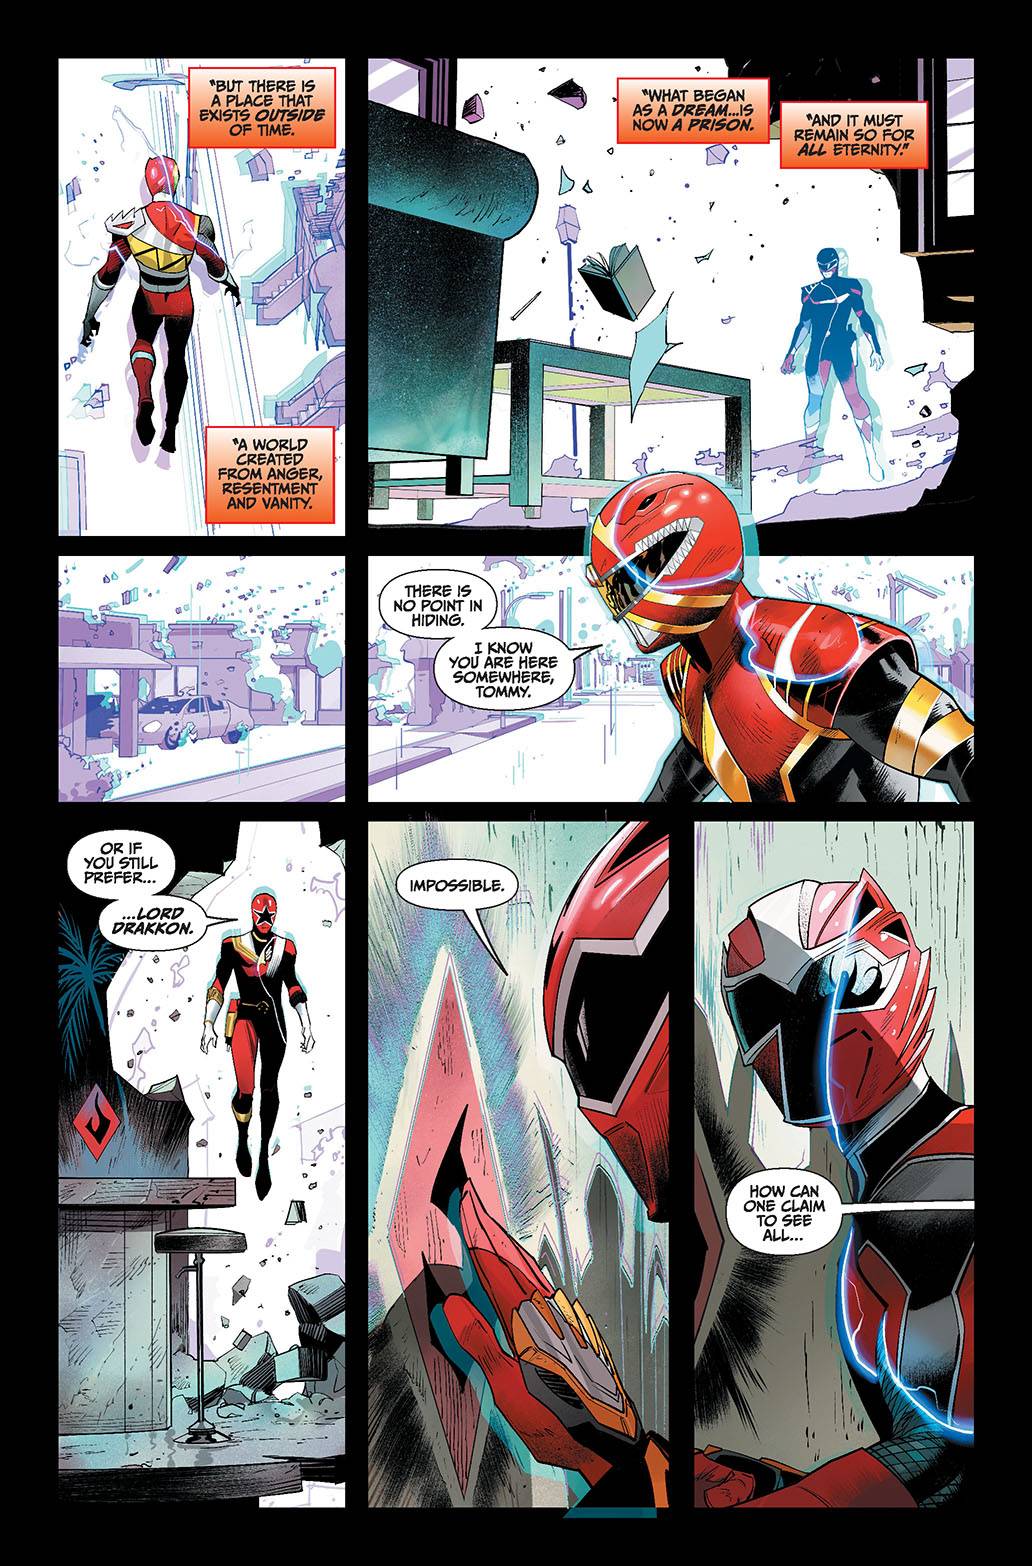 Mighty Morphin Power Rangers 49 - Heroes Cave